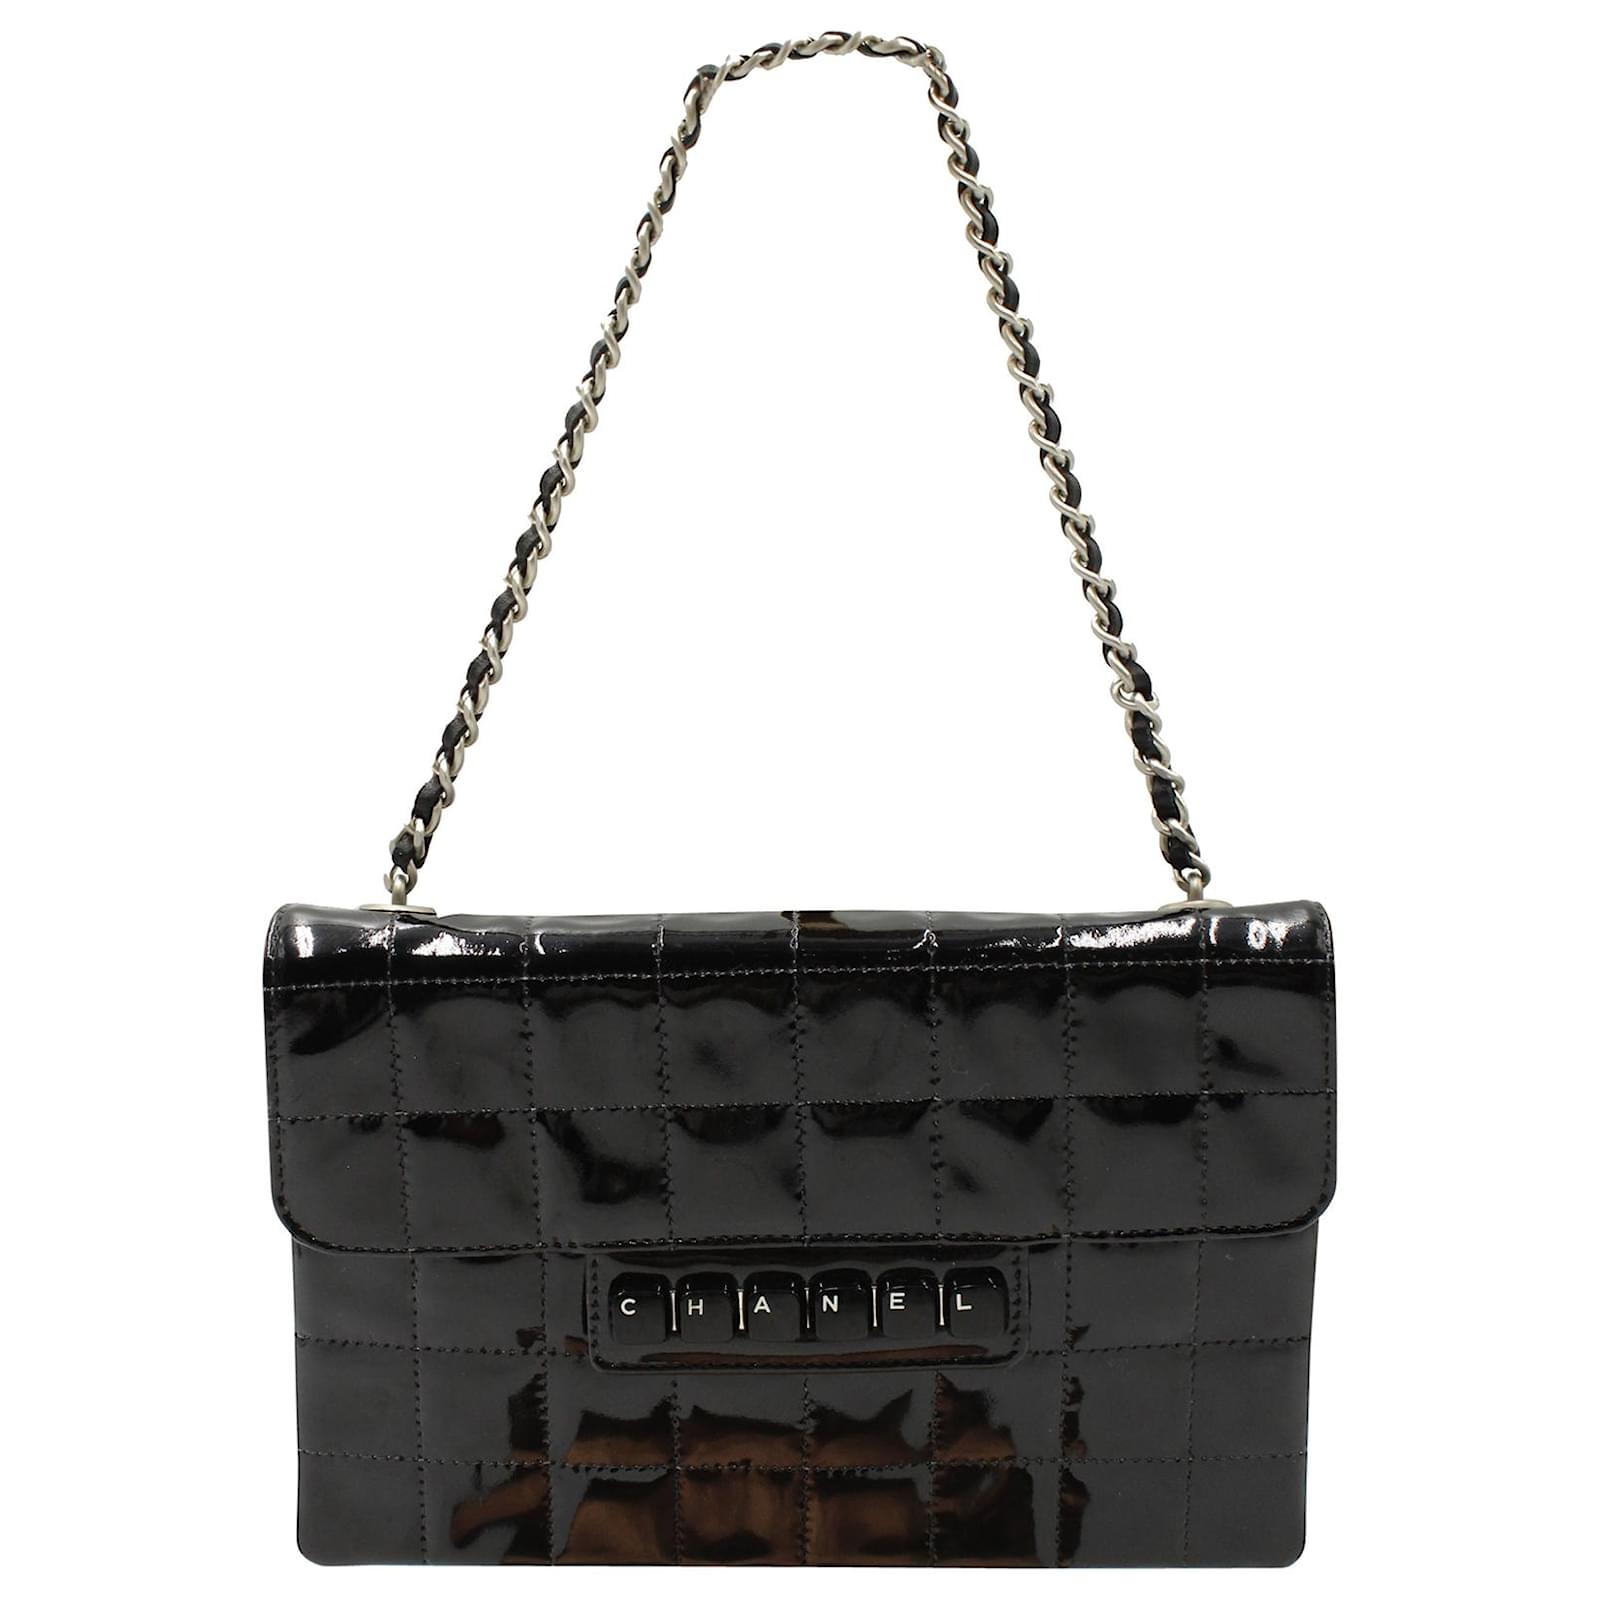 Chanel Typewriter Clutch Bag in Black Patent Leather ref.887435